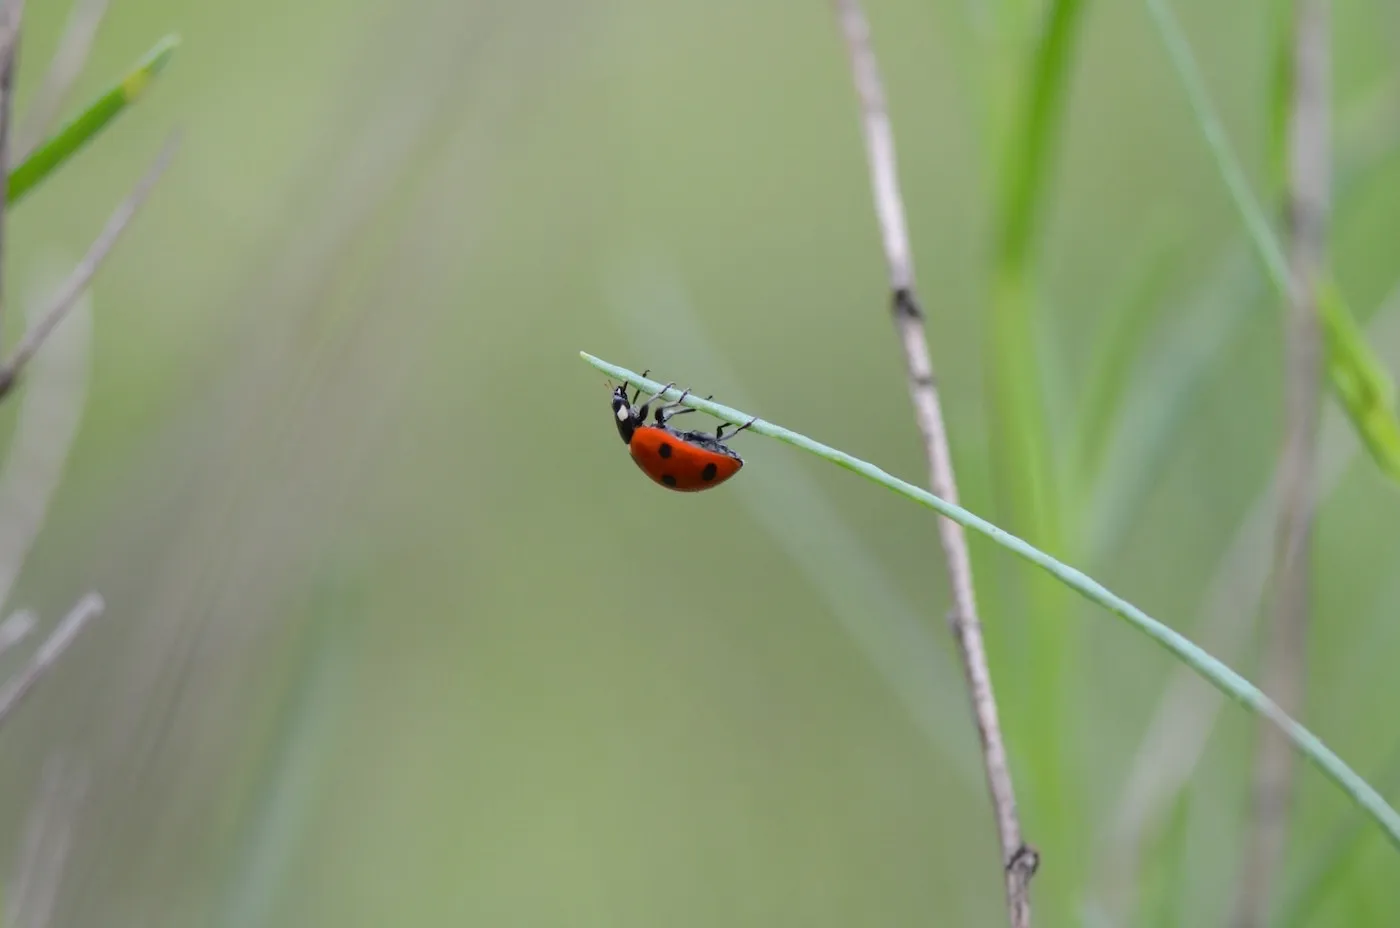 A ladybug climbing on a twig representing the idea of an insidious software bug